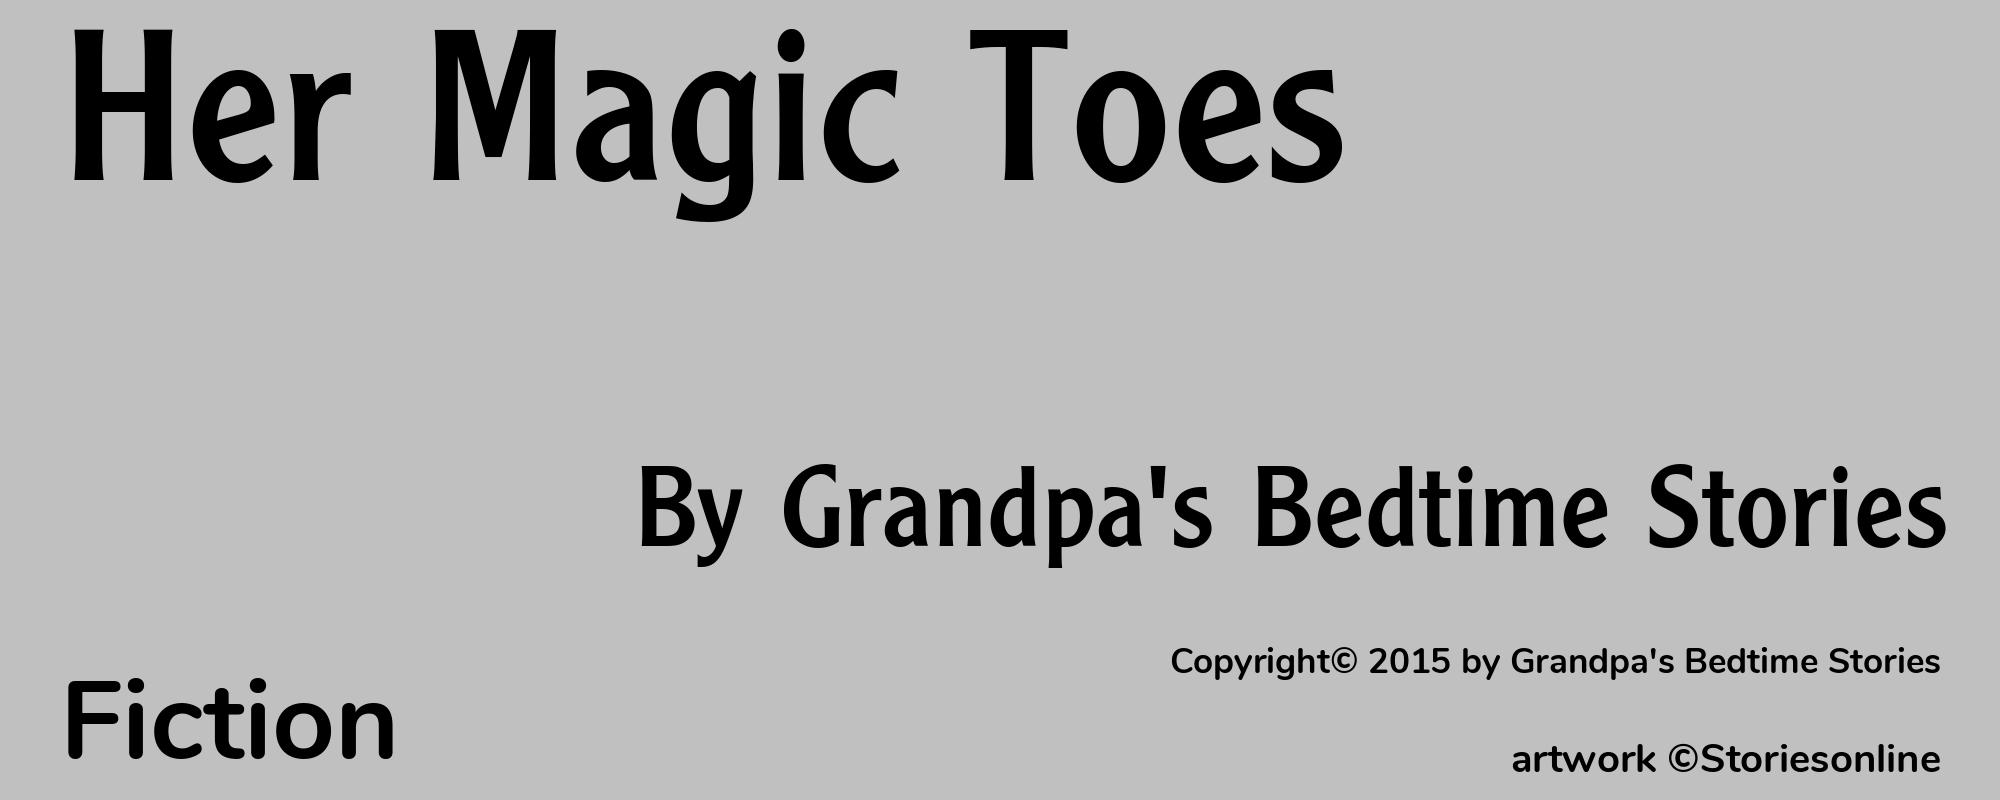 Her Magic Toes - Cover